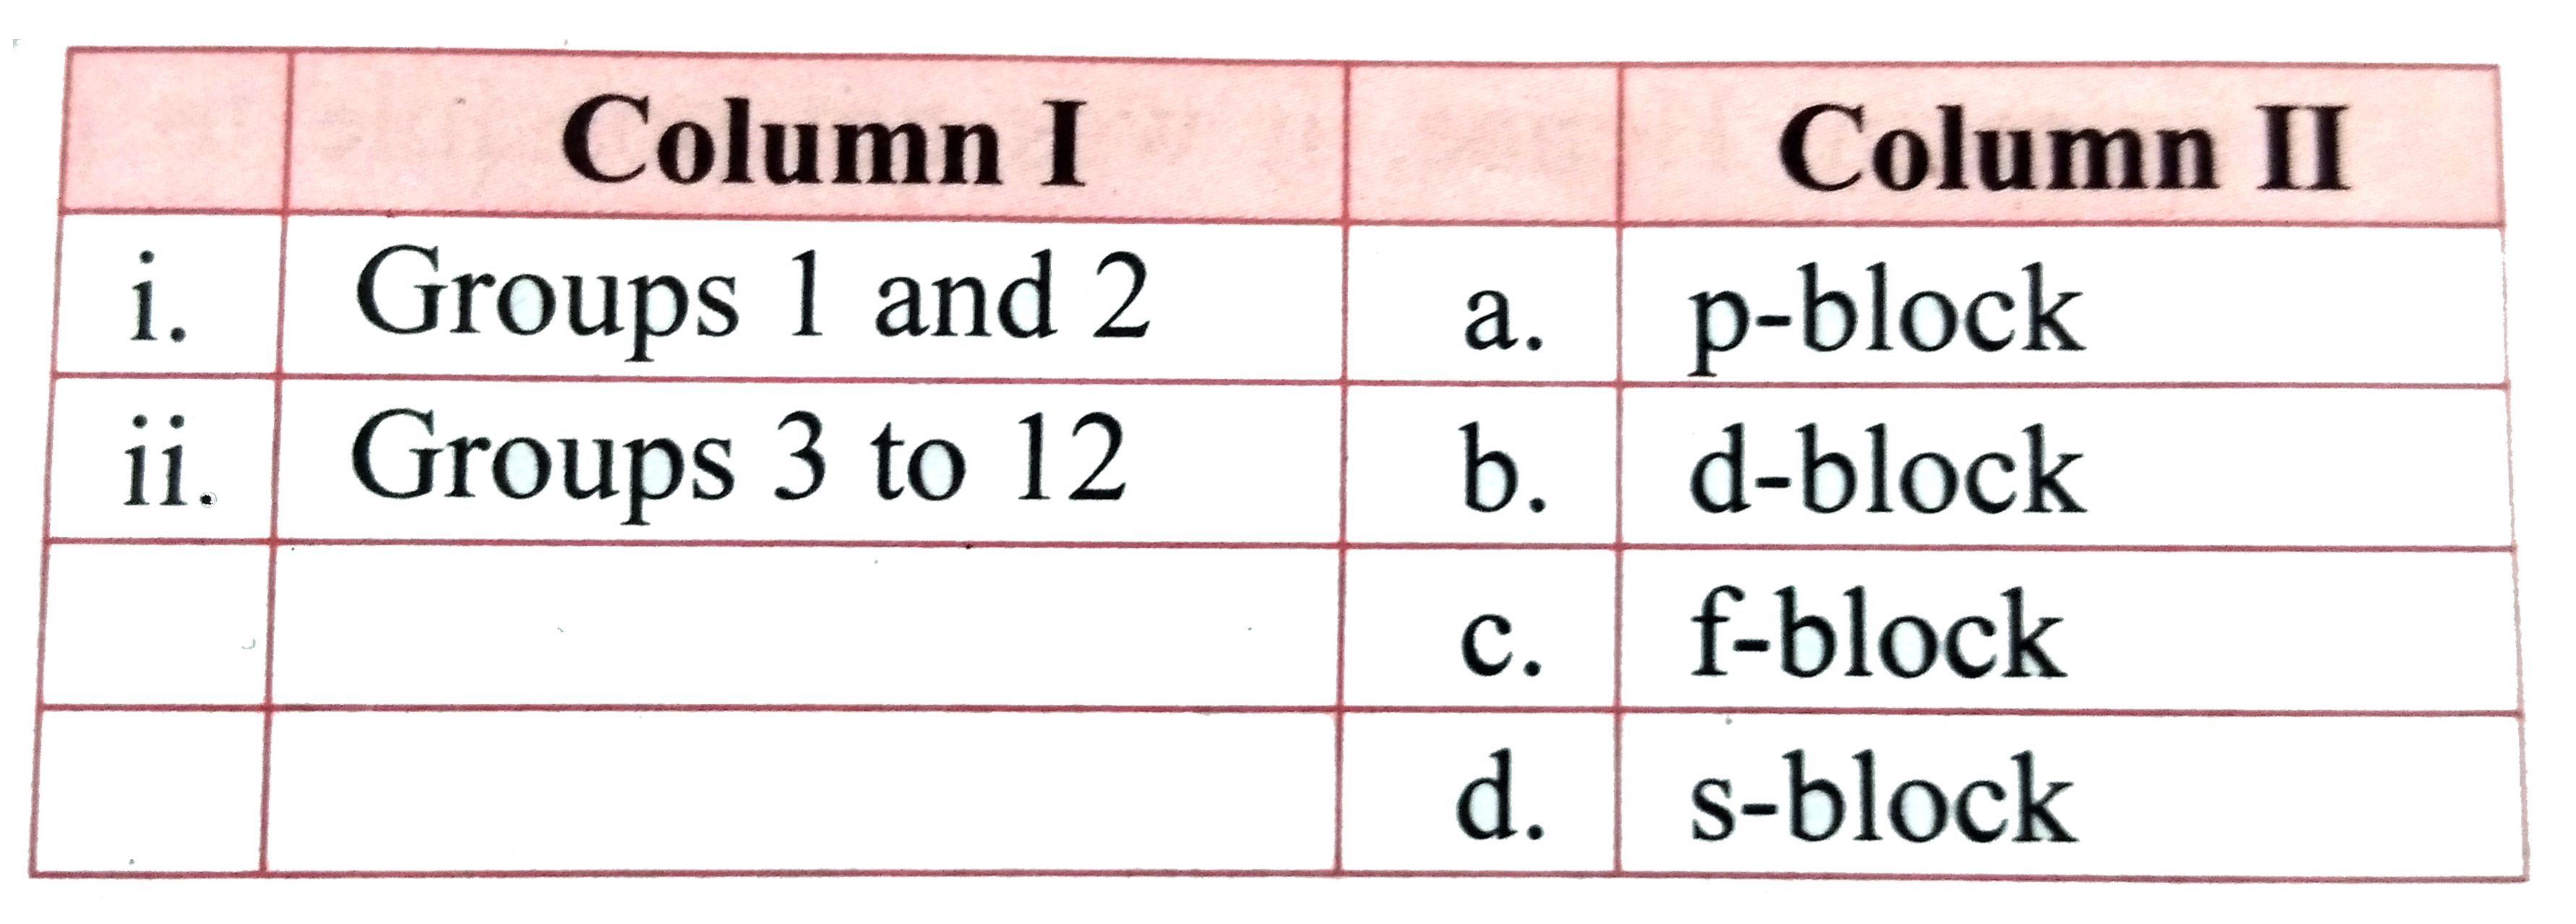 Match the groups given in Column I with the corresponding block of the periodic table given in Column II.